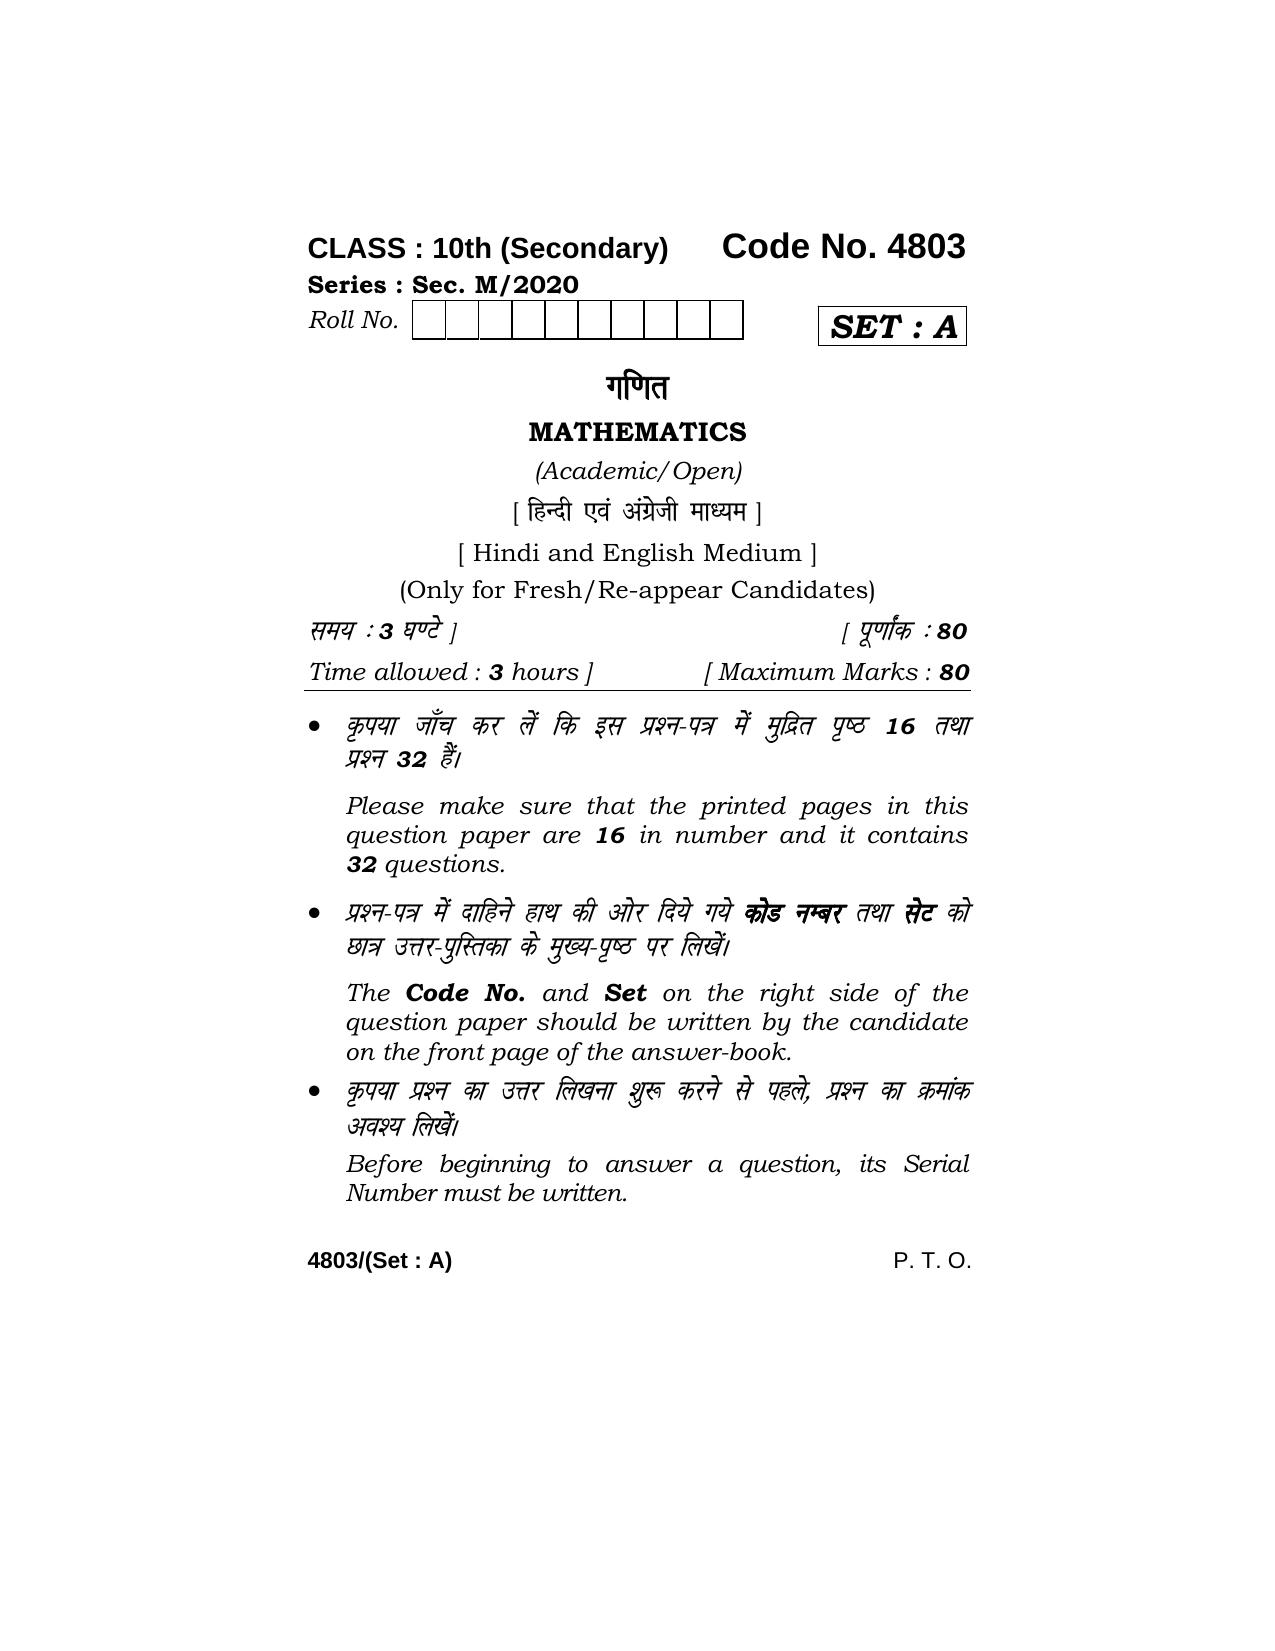 Haryana Board HBSE Class 10 Mathematics 2020 Question Paper - Page 1